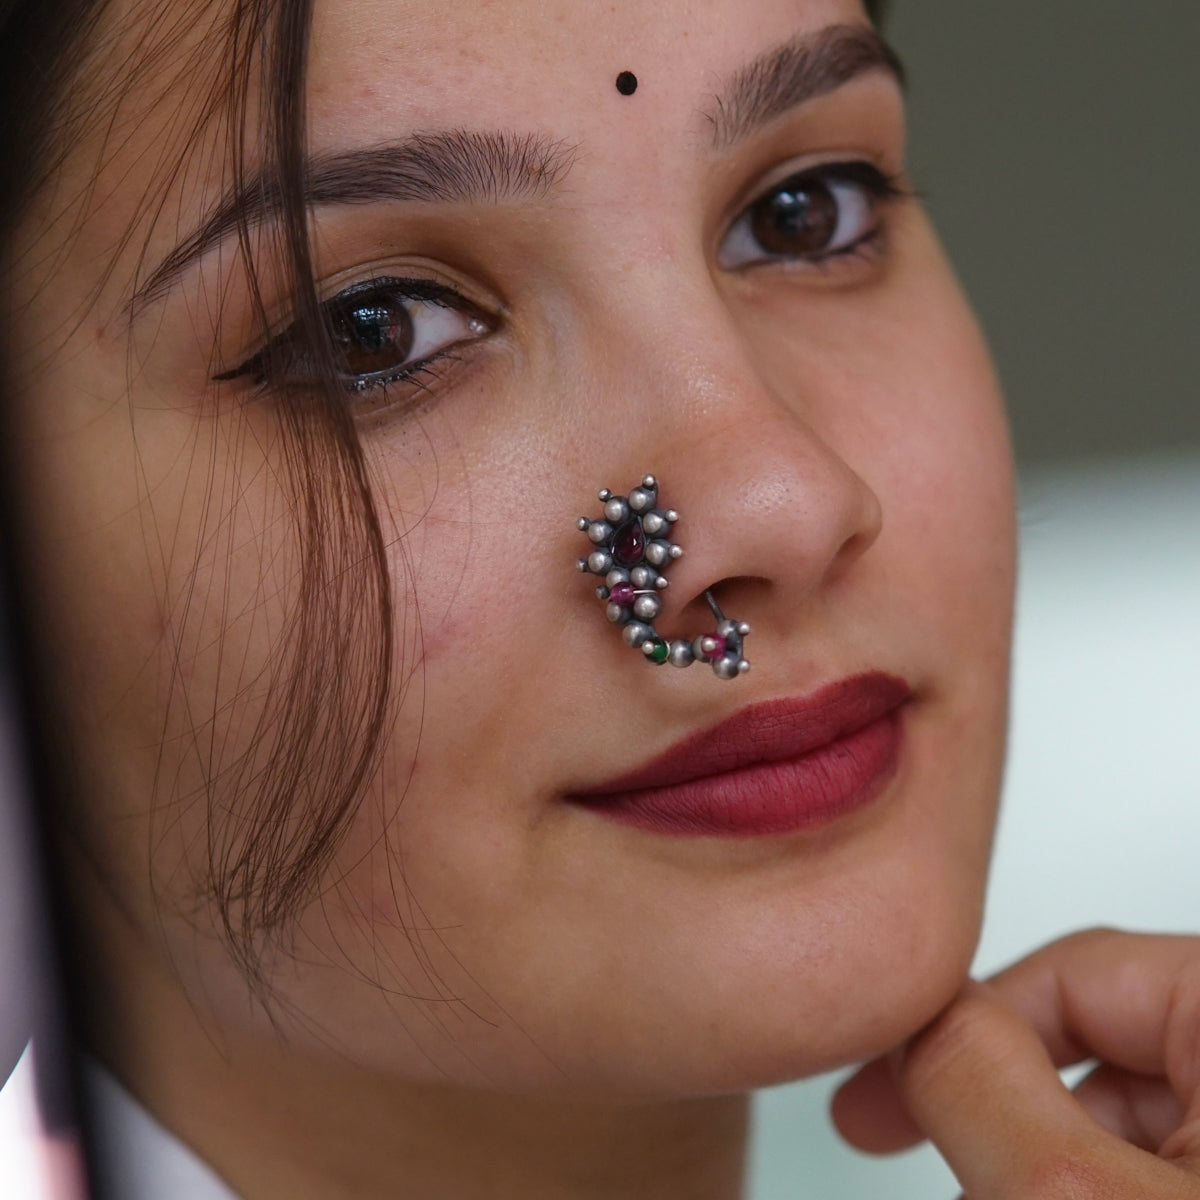 a close up of a woman with a nose piercing